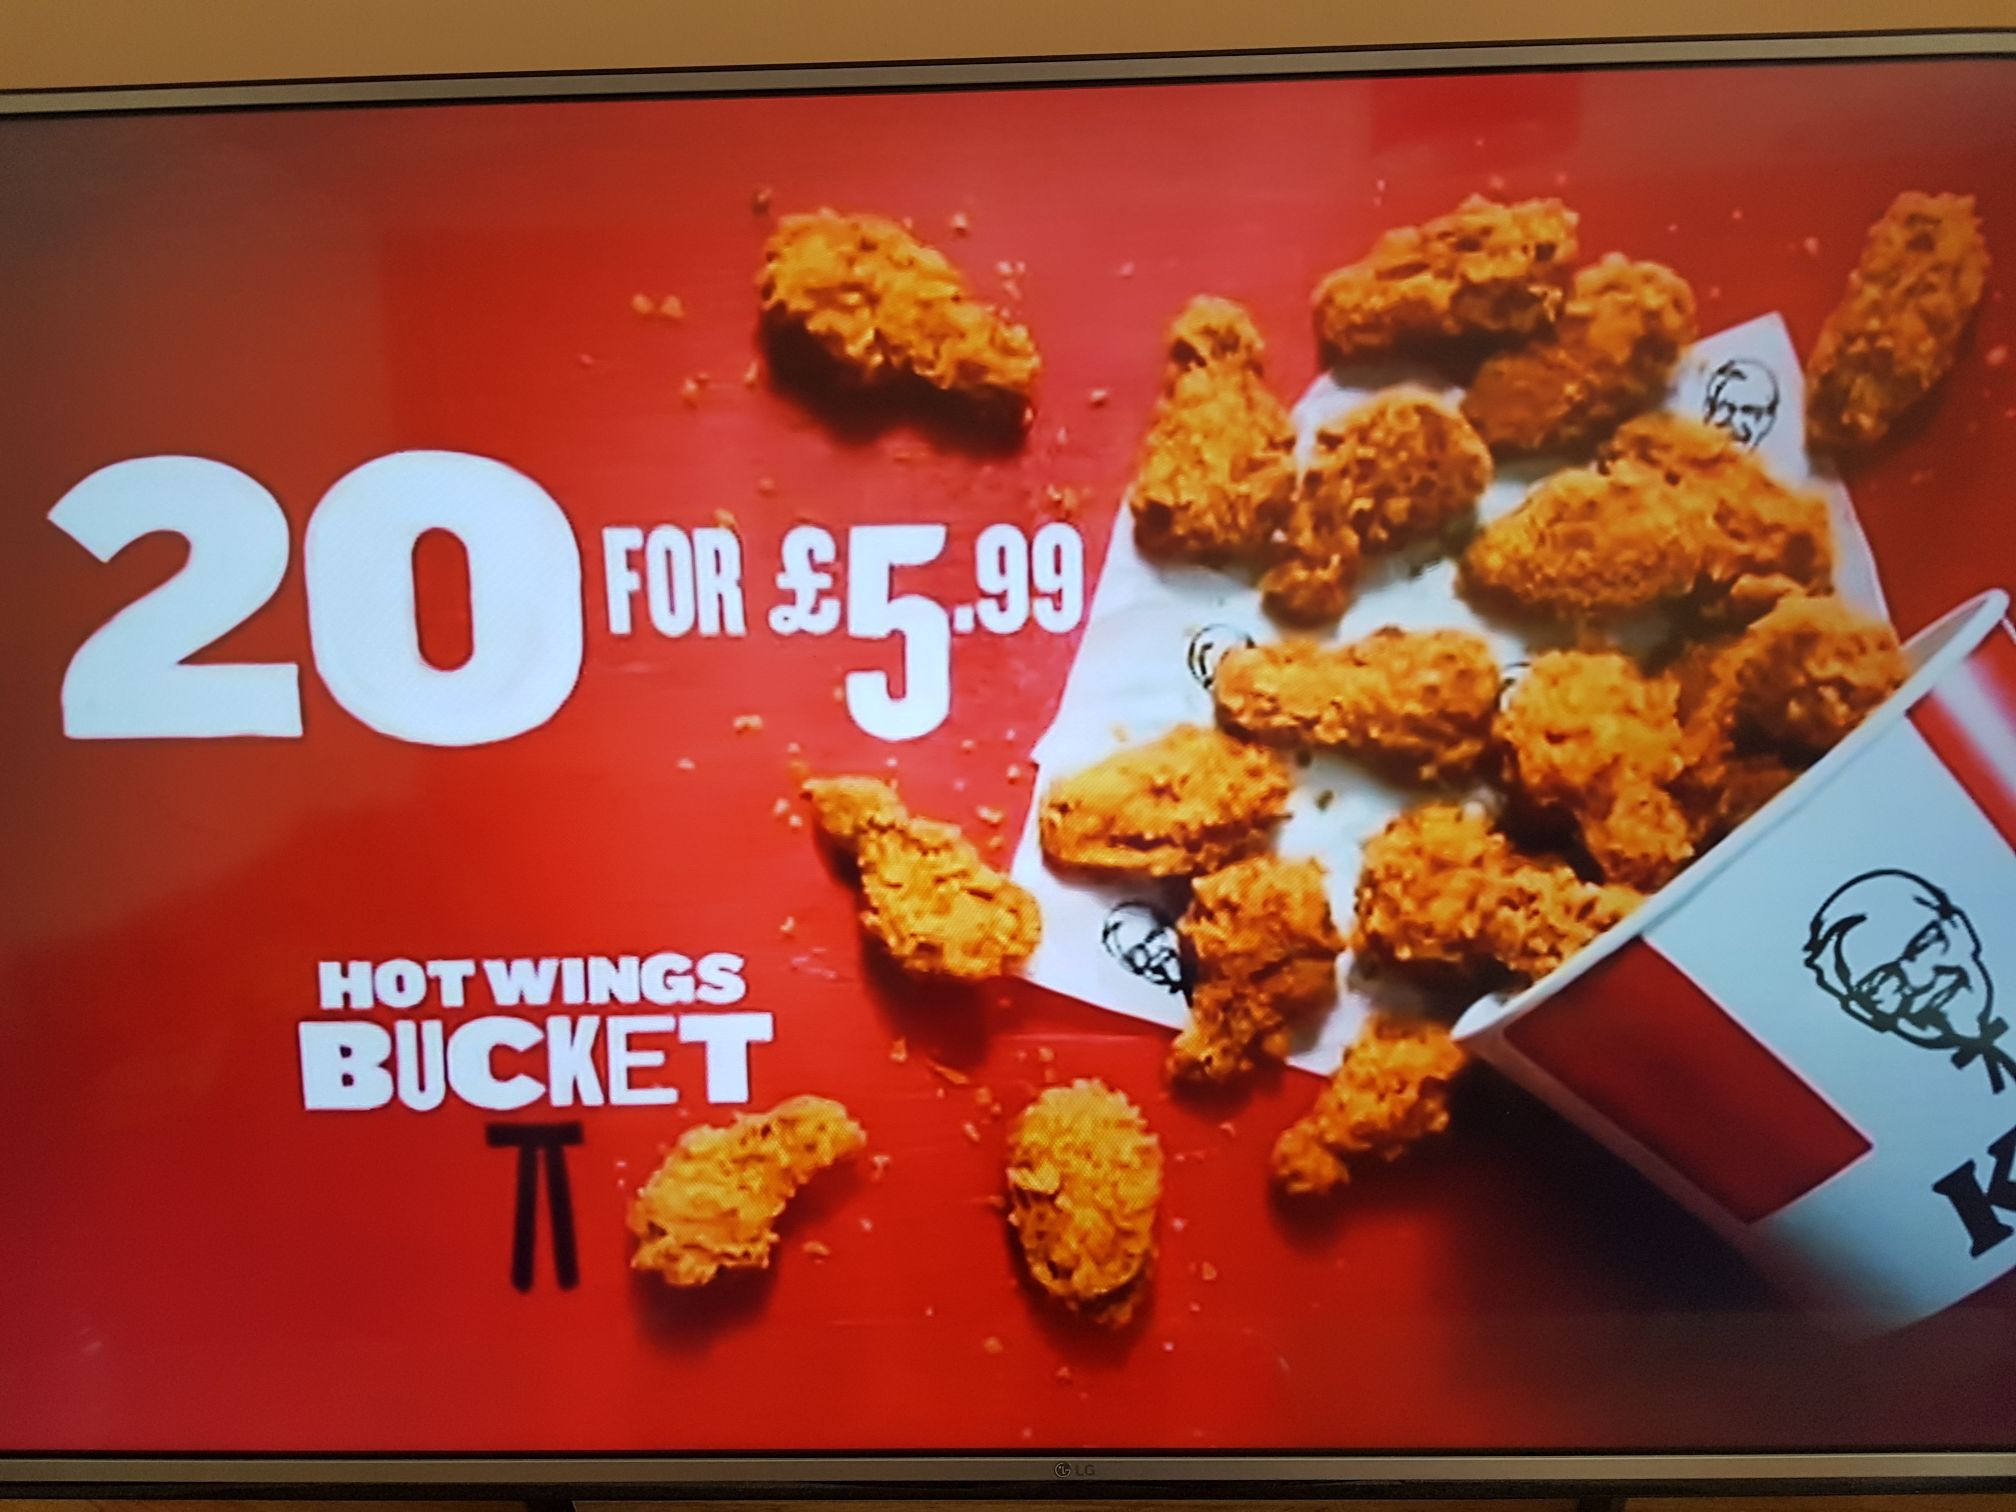 Hot Wings Bucket! 20 for £5.99 @ KFC - Scotland UPDATE been extended to 5th May - hotukdeals